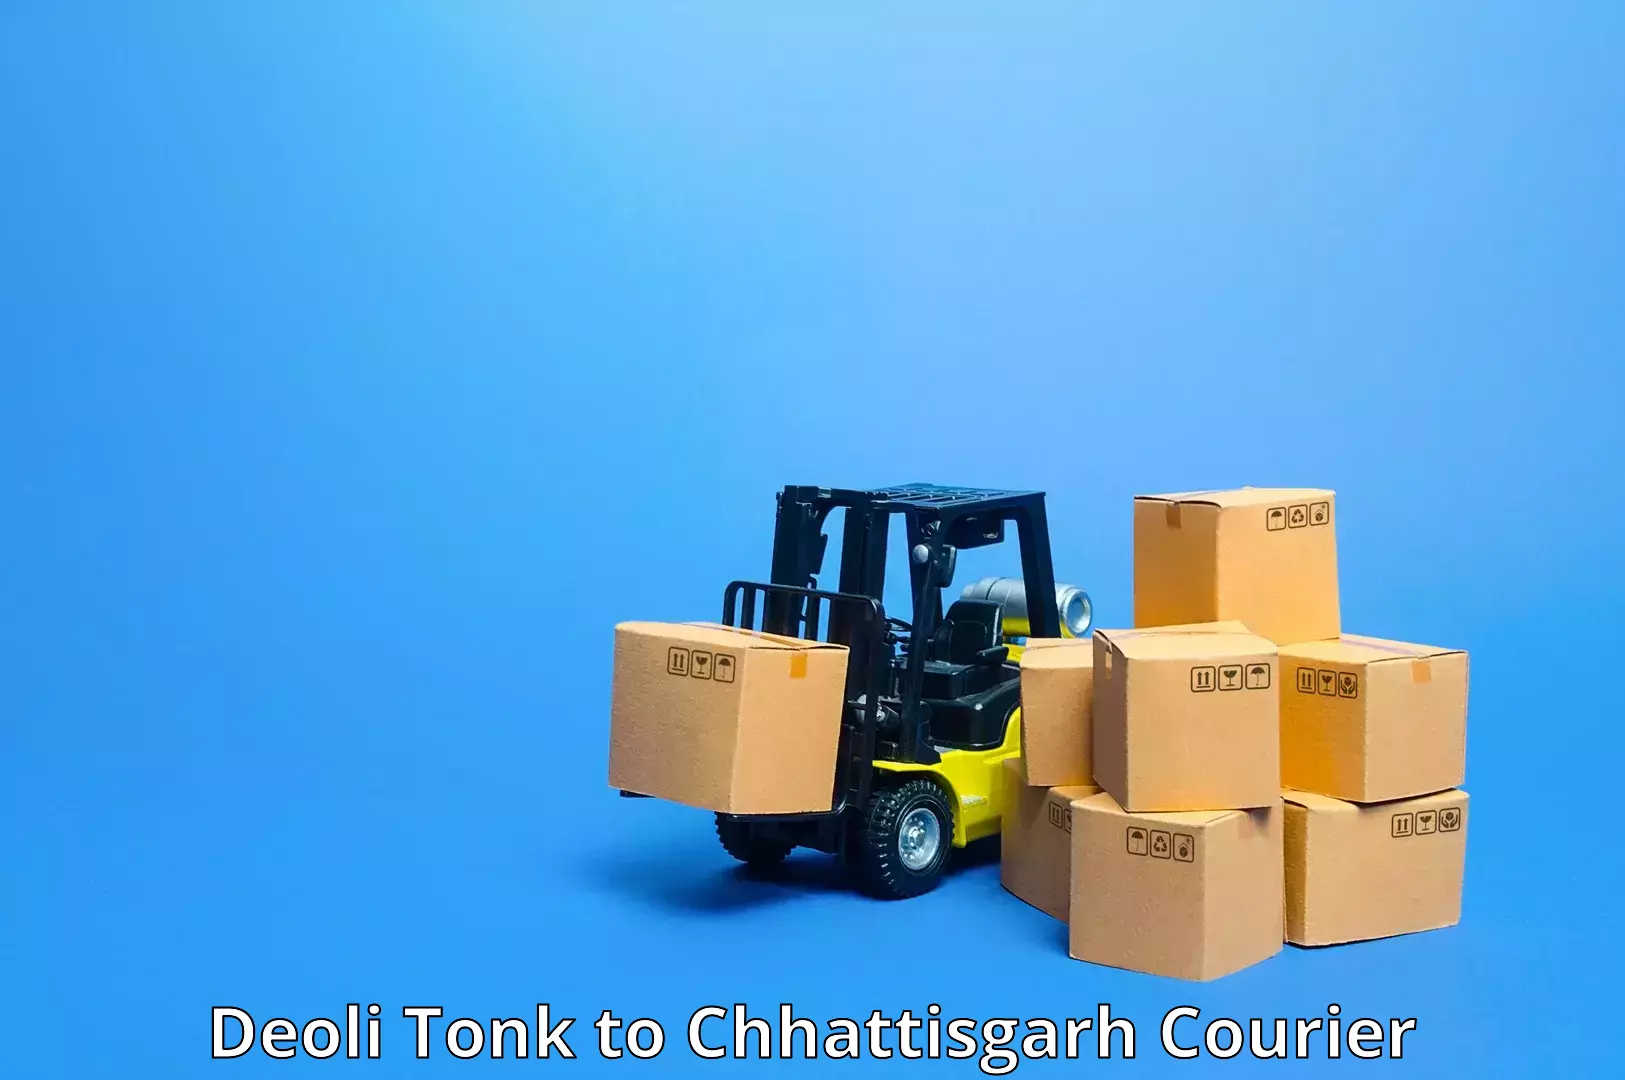 State-of-the-art courier technology Deoli Tonk to keshkal